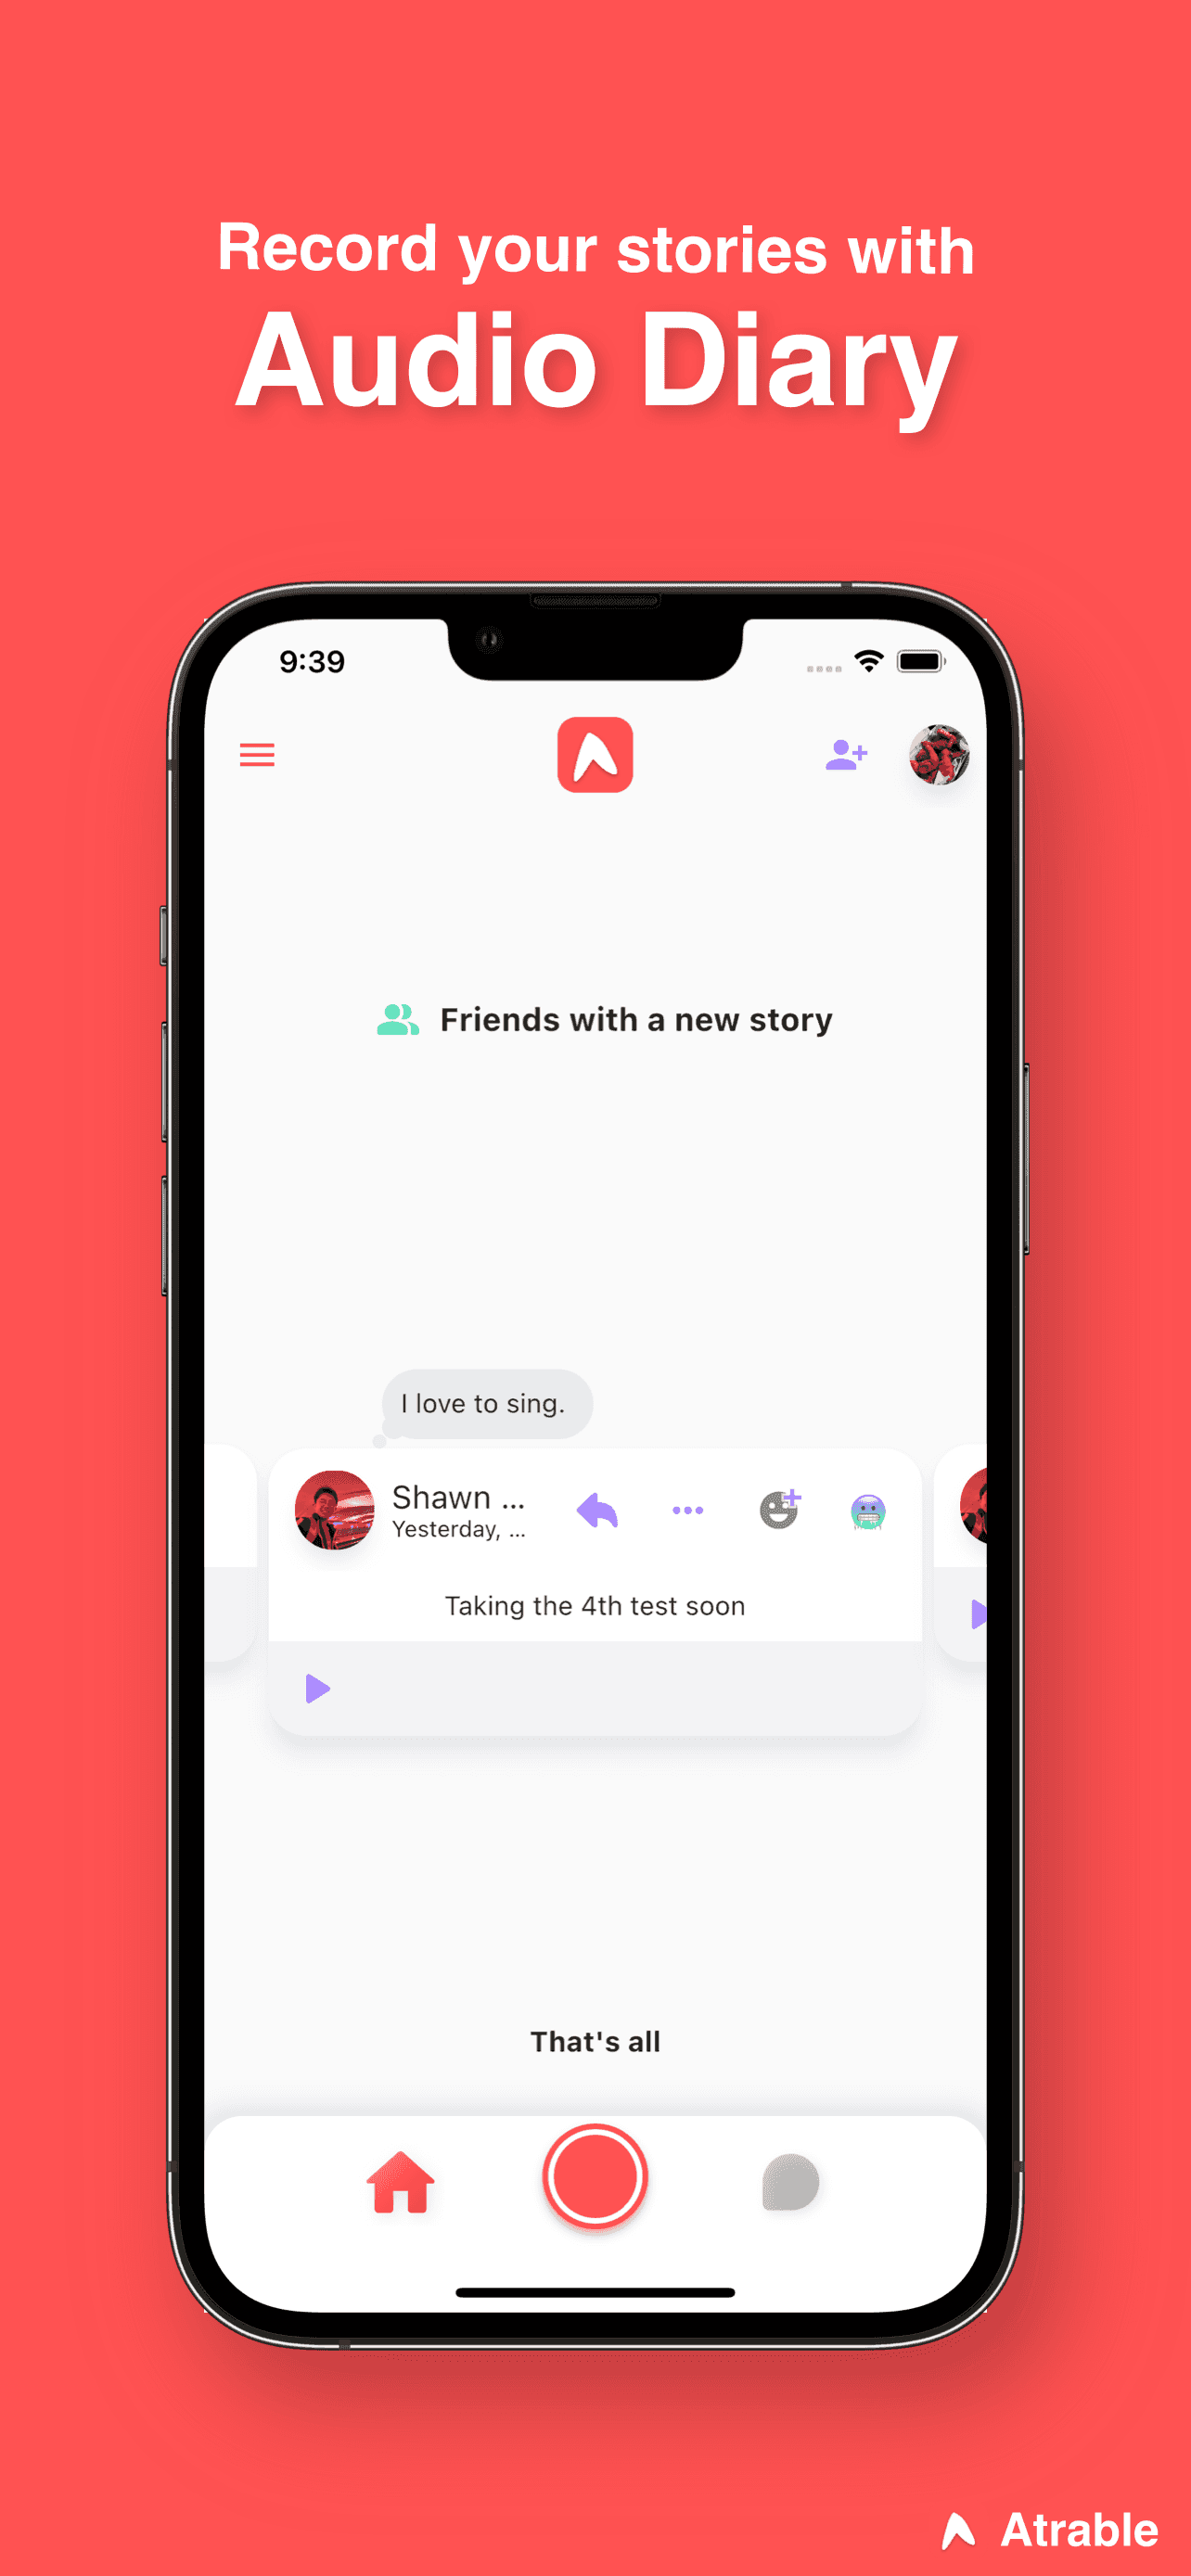 Record your stories with Audio Diary